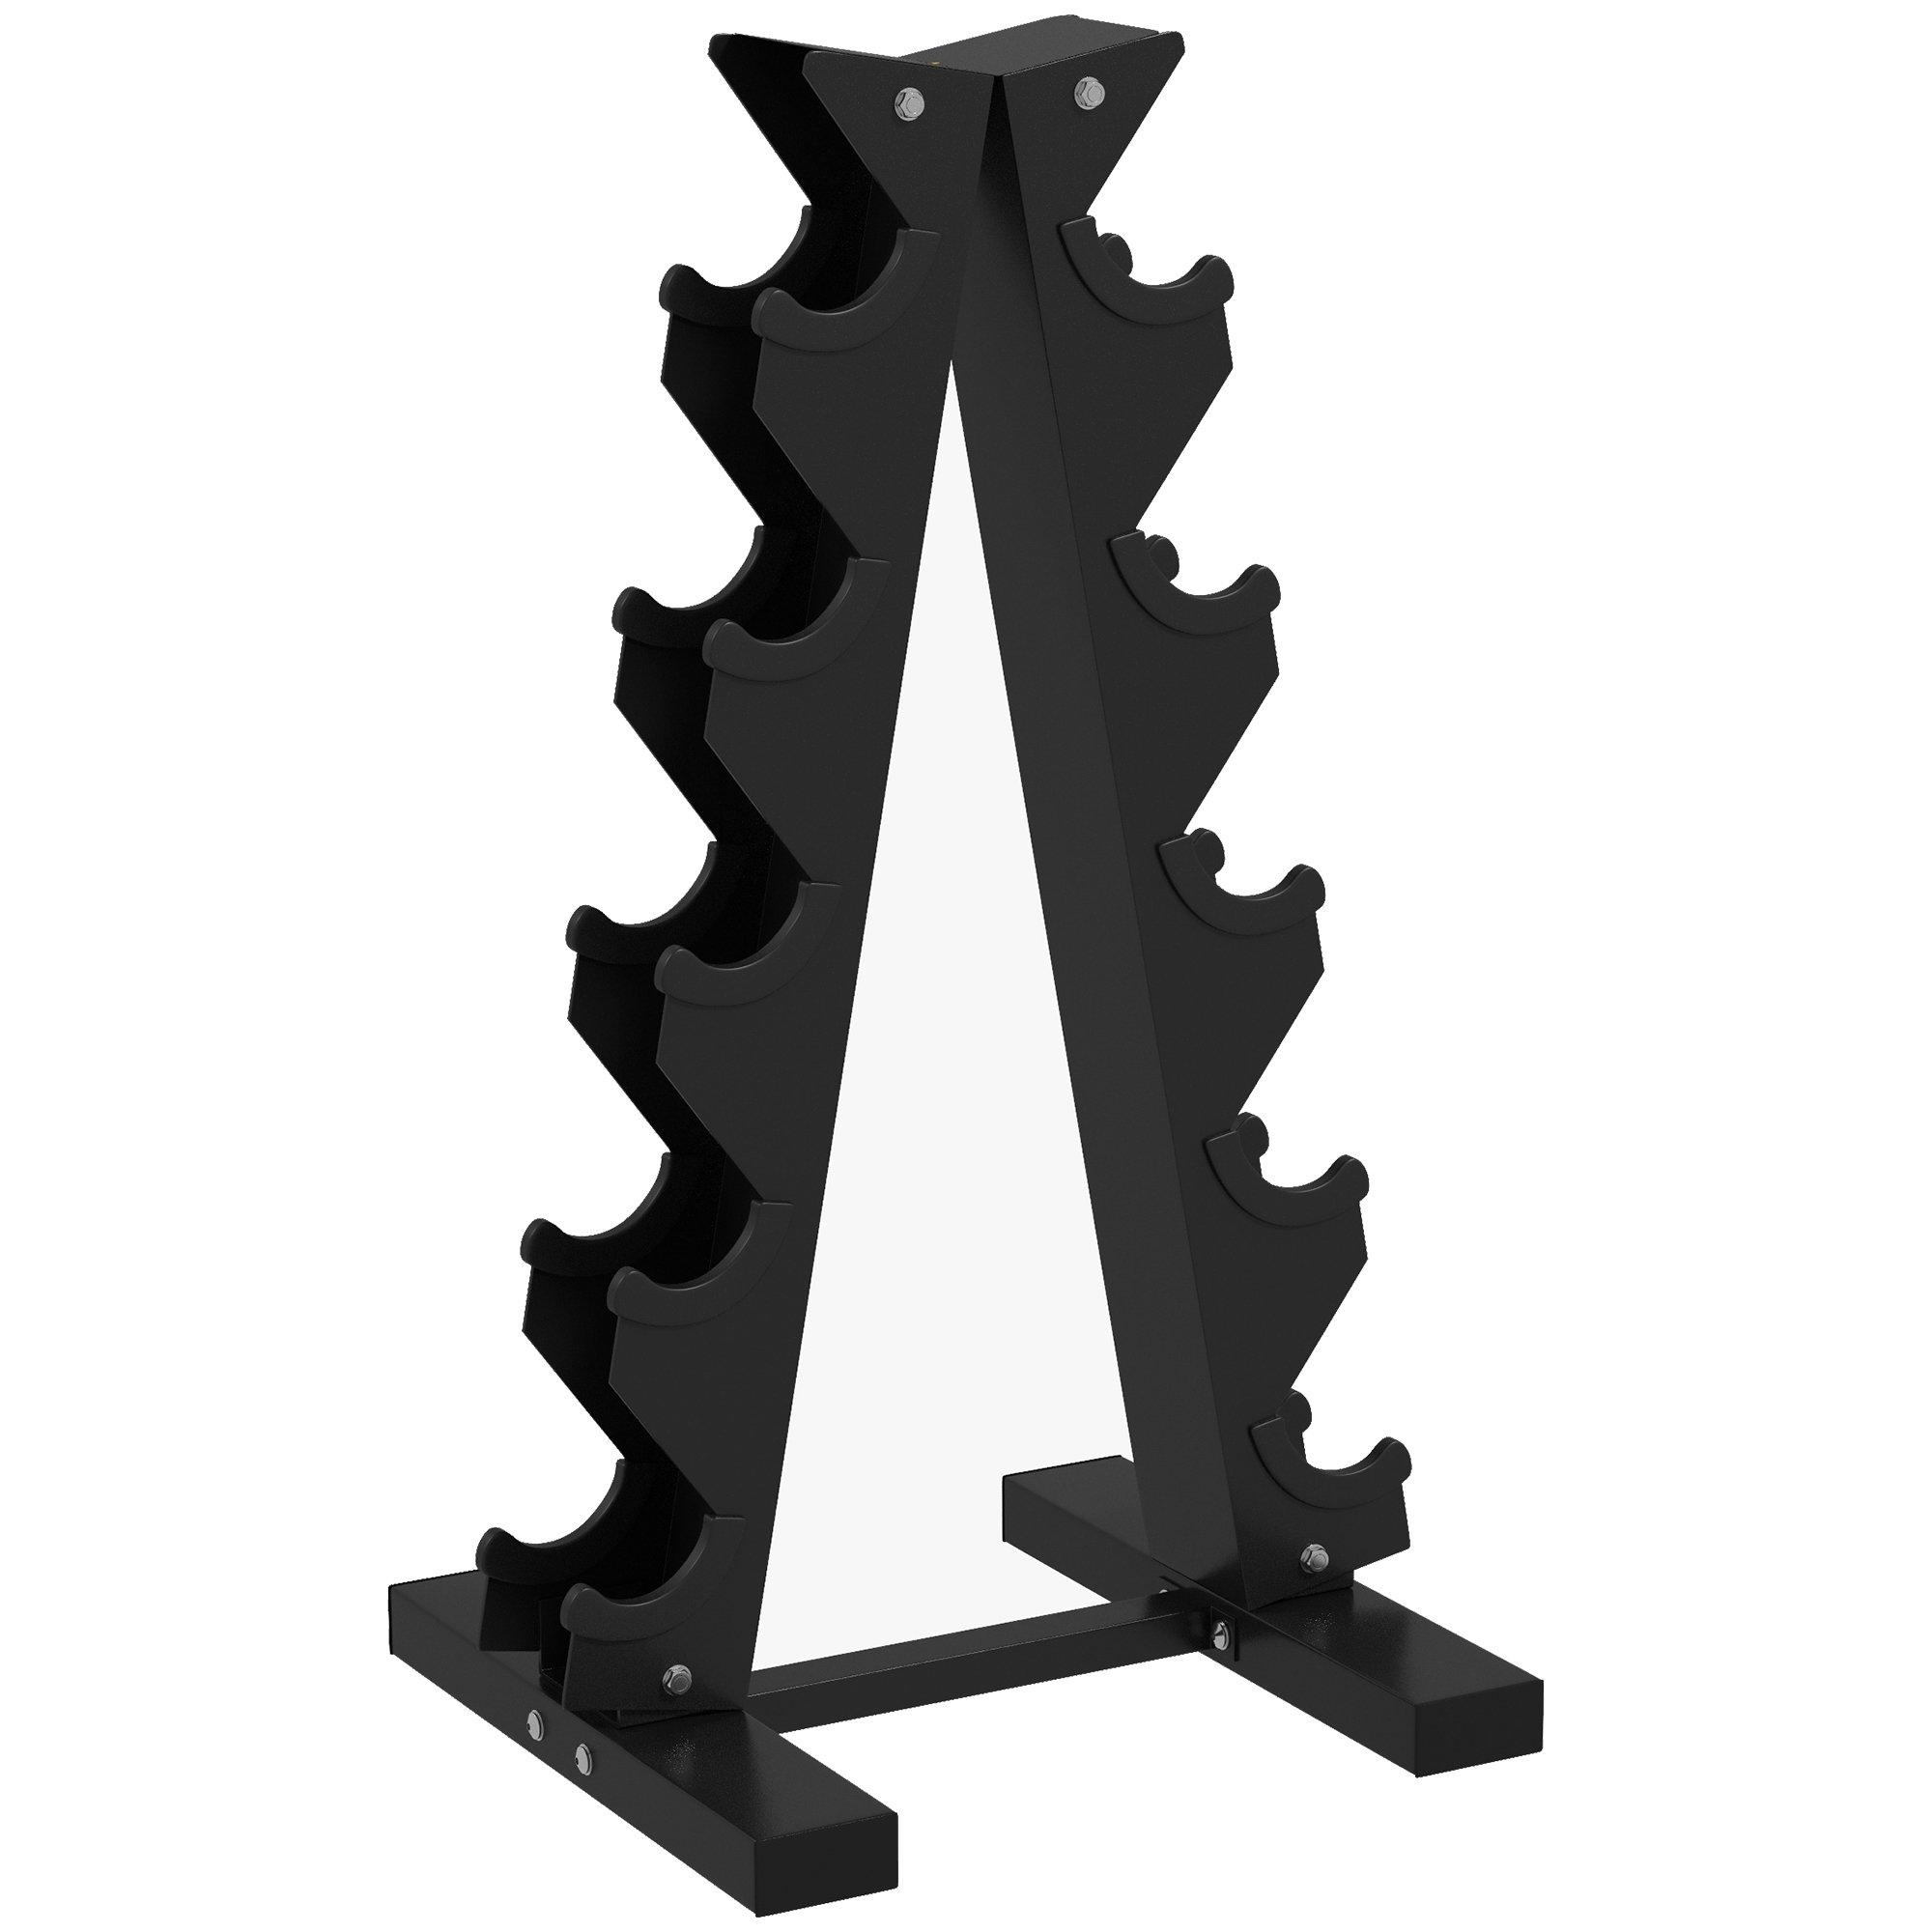 Five-Tier Weight Tree, Steel Dumbbell Rack for Home Gym Exercise